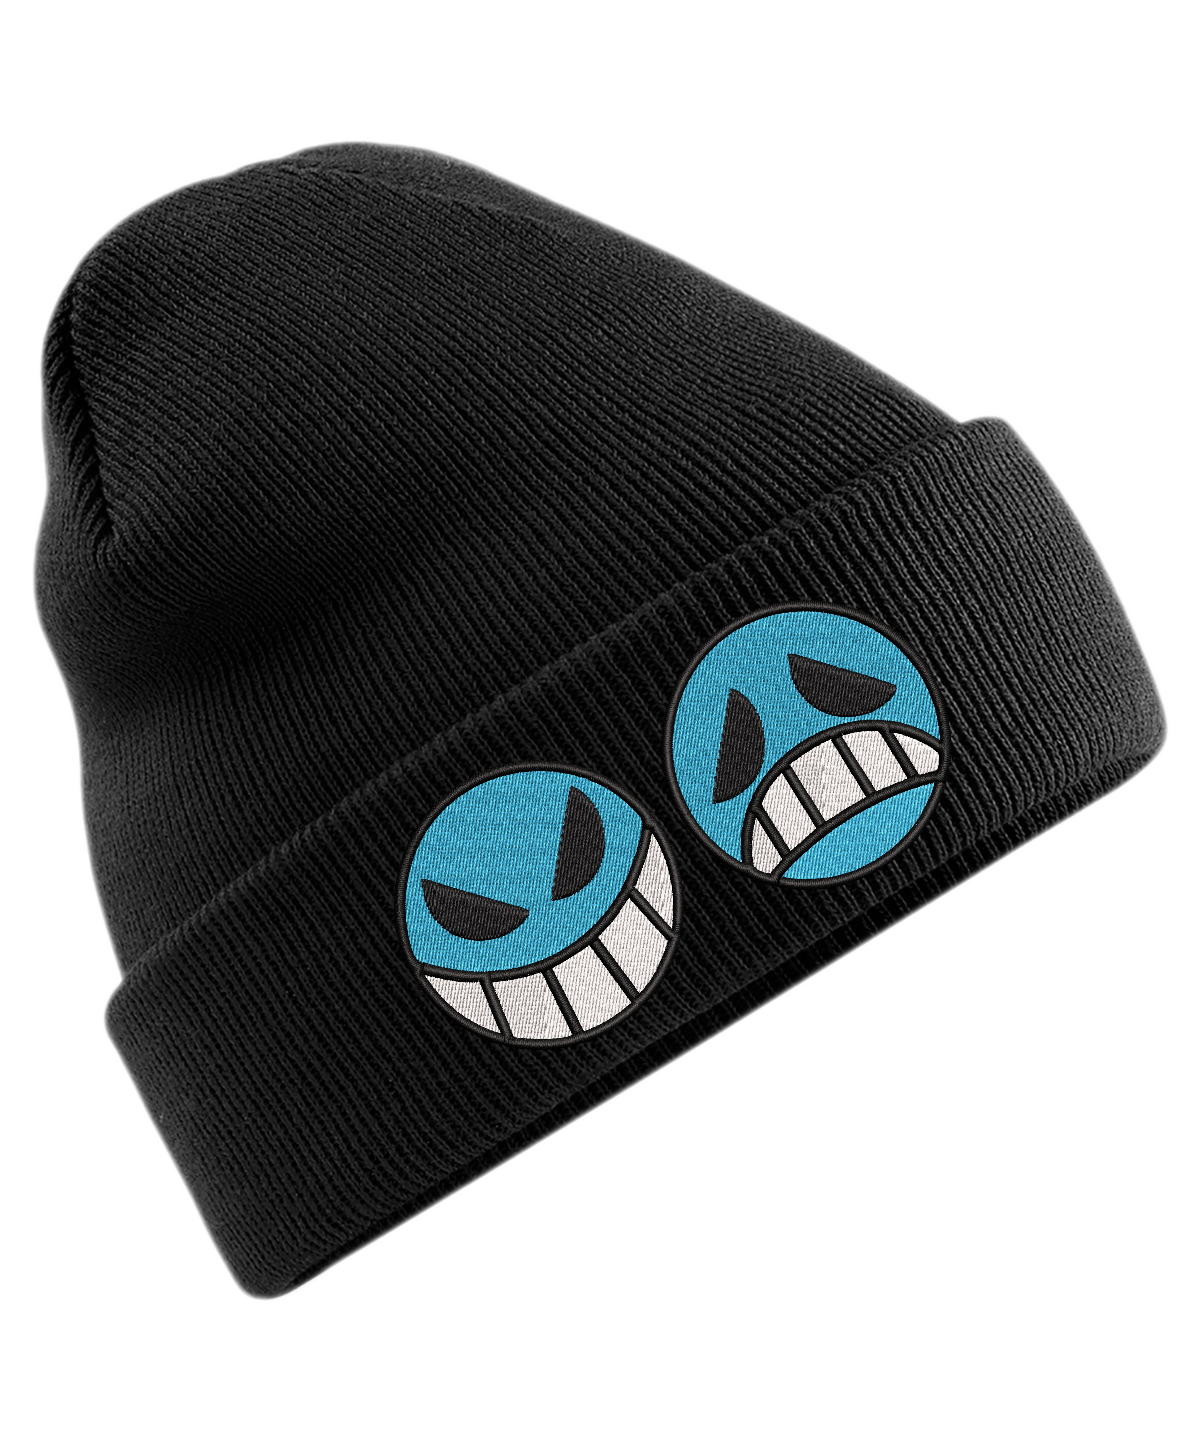 One Piece Embroidery Beanie hat. Ace beanie. smiley face. beanie hats. Anime Embroidered hats.